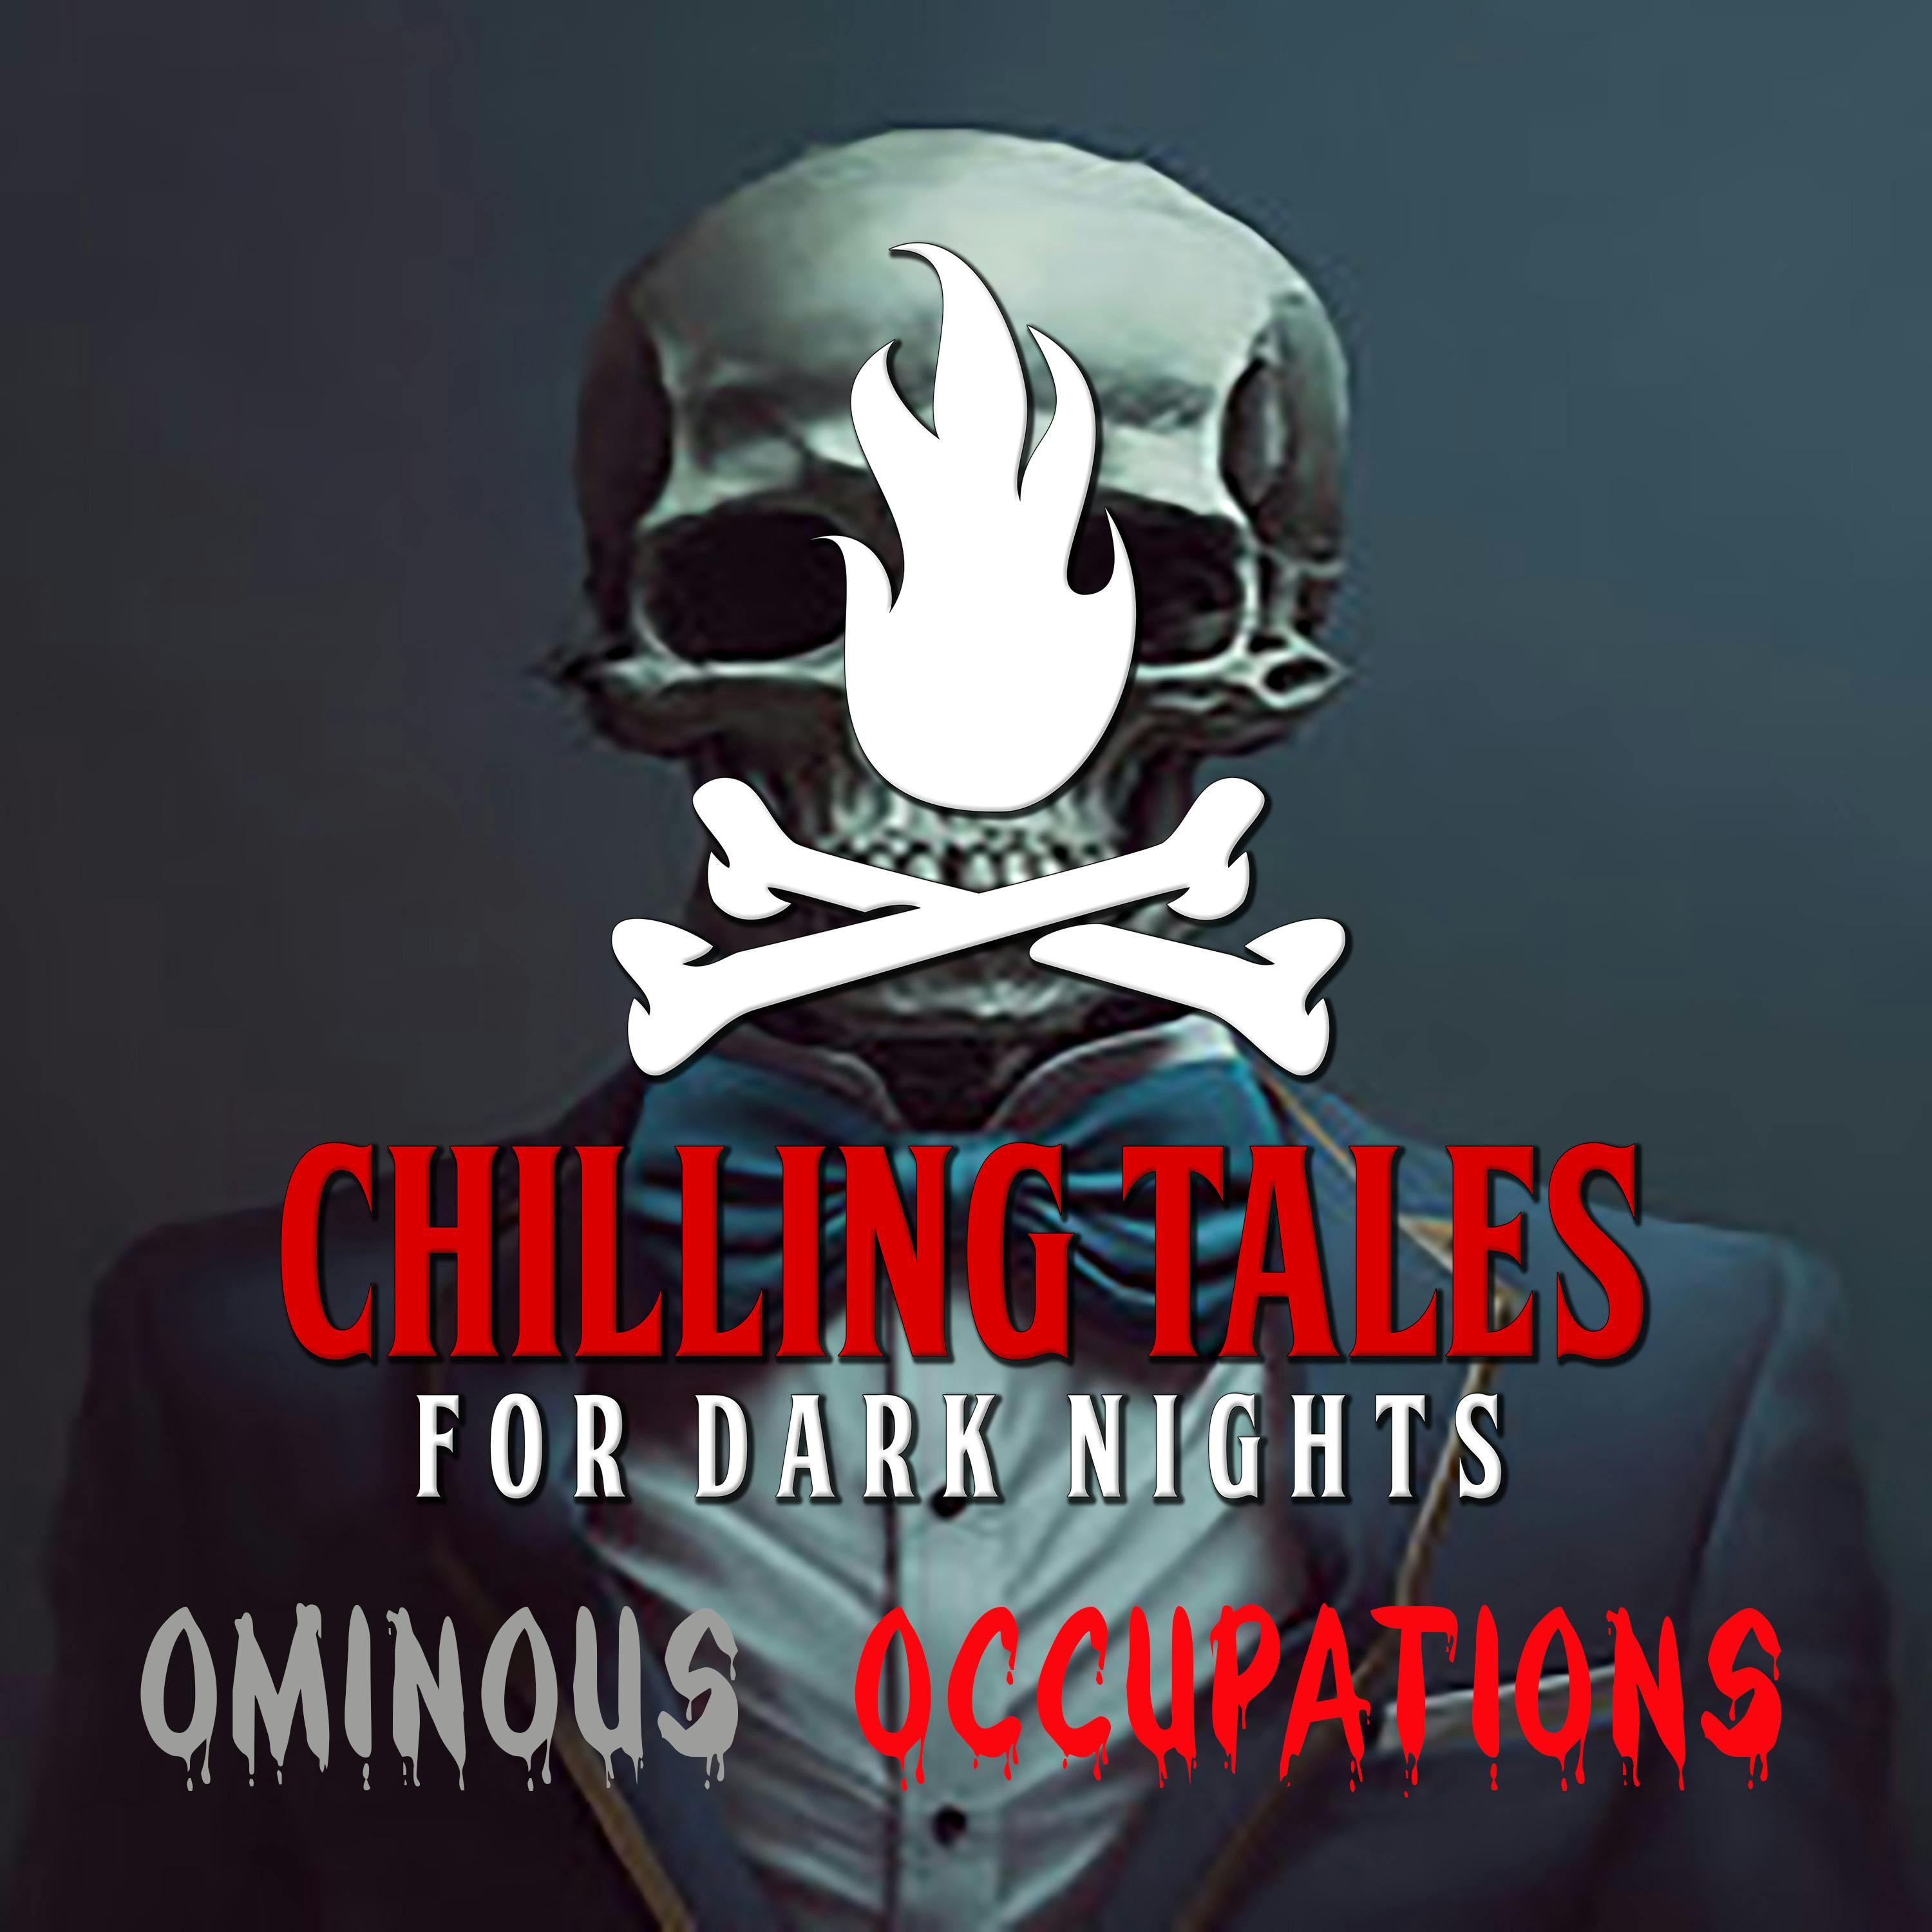 185: Ominous Occupations - Chilling Tales for Dark Nights